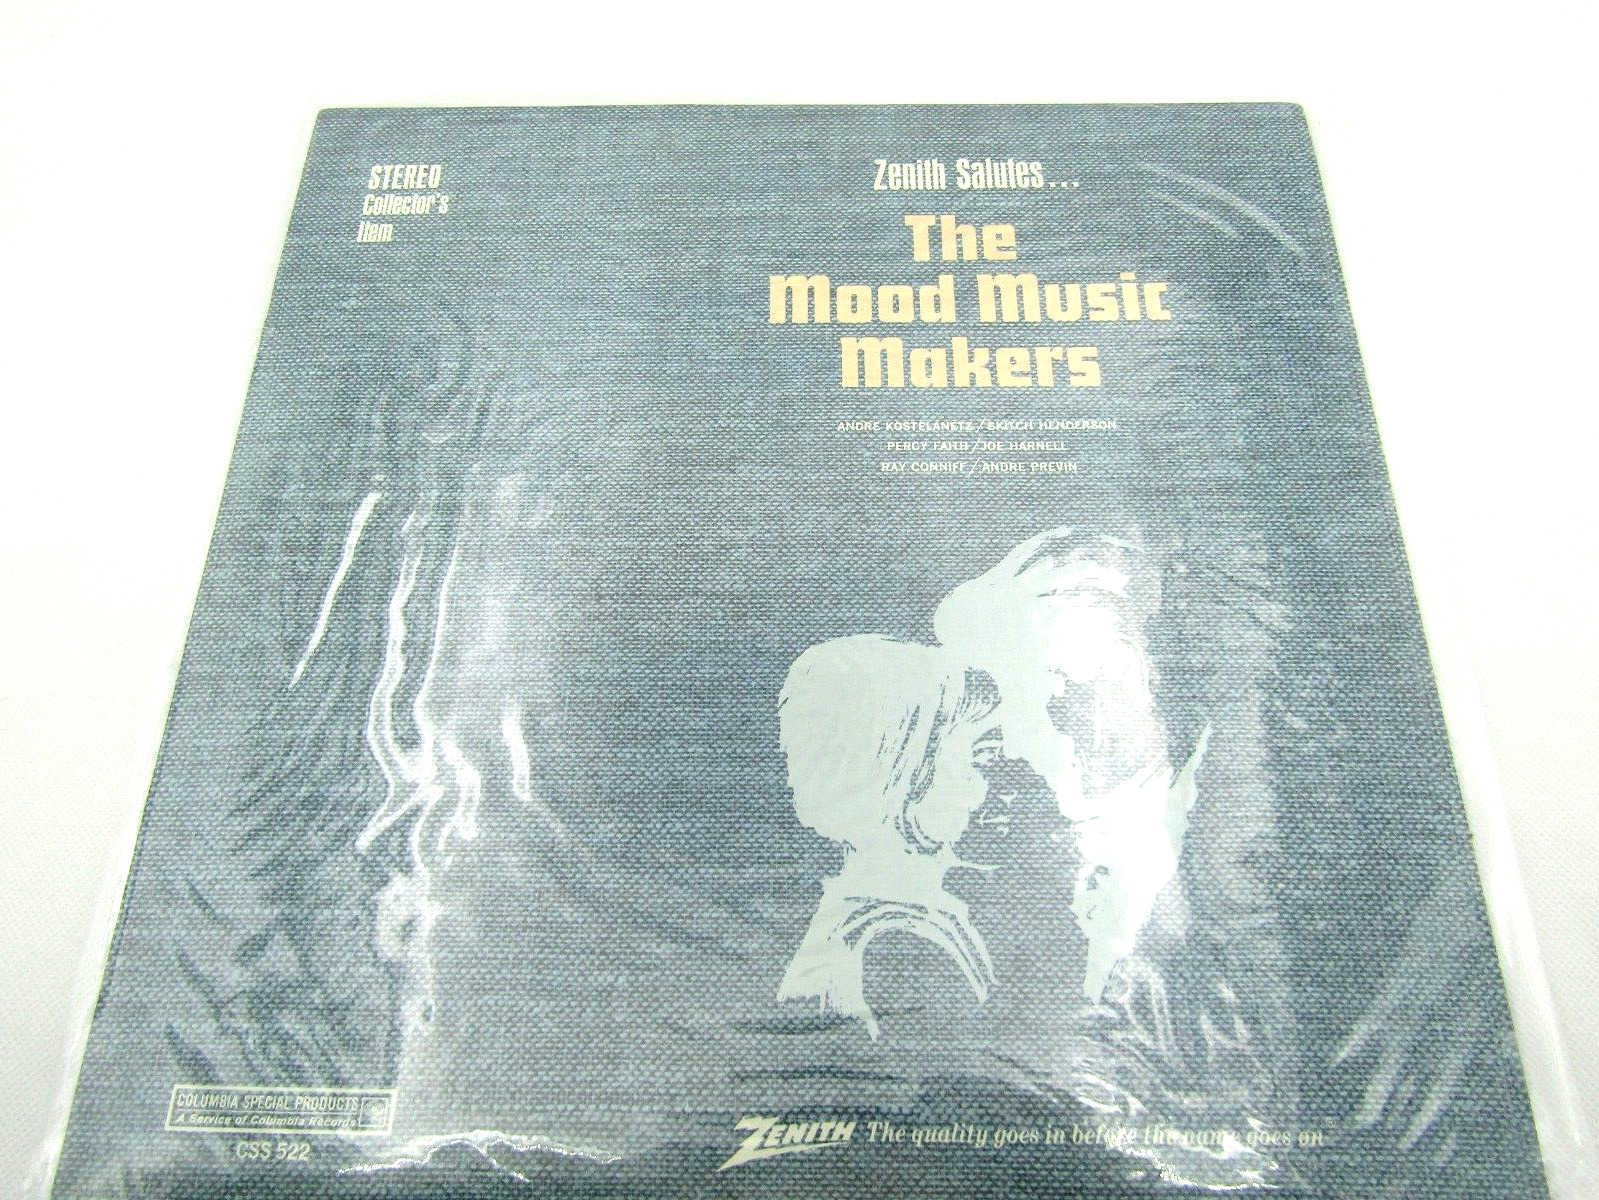 Zenith Salutes...The Mood Music Makers ~ Various Artists ~ Limited Edition